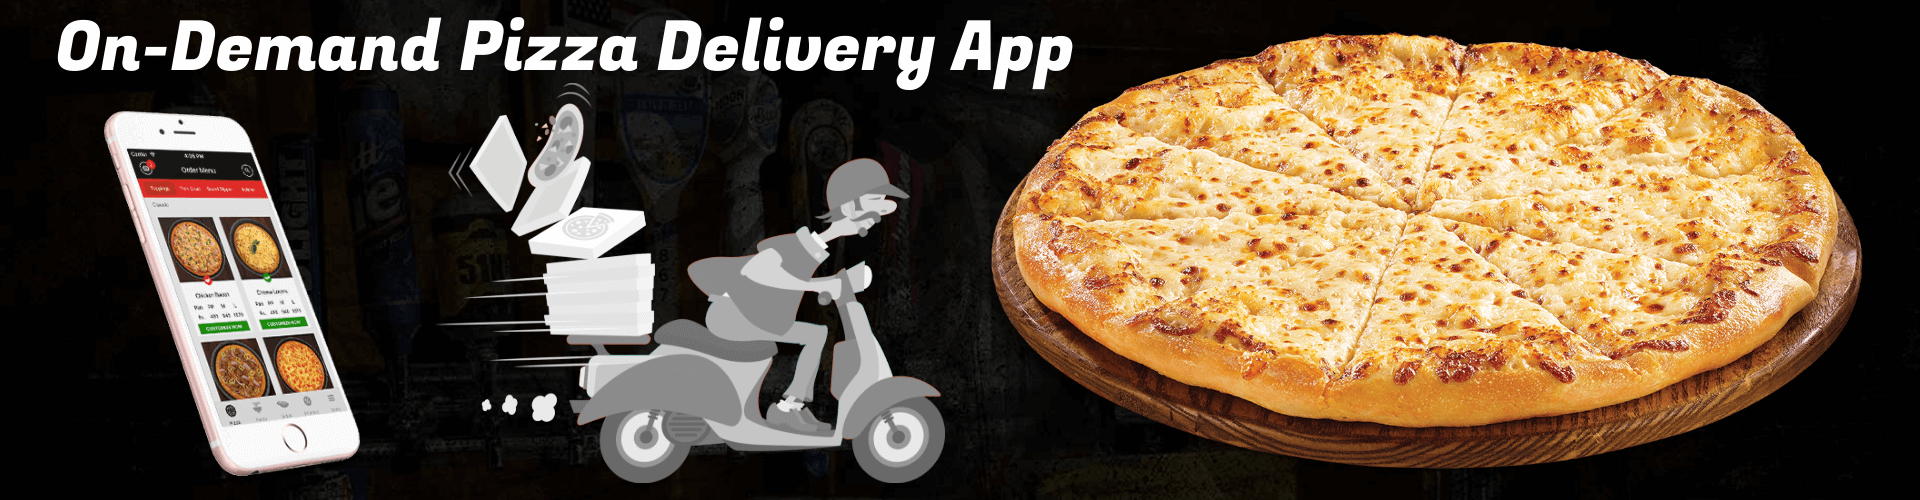 on demand pizza delivery app